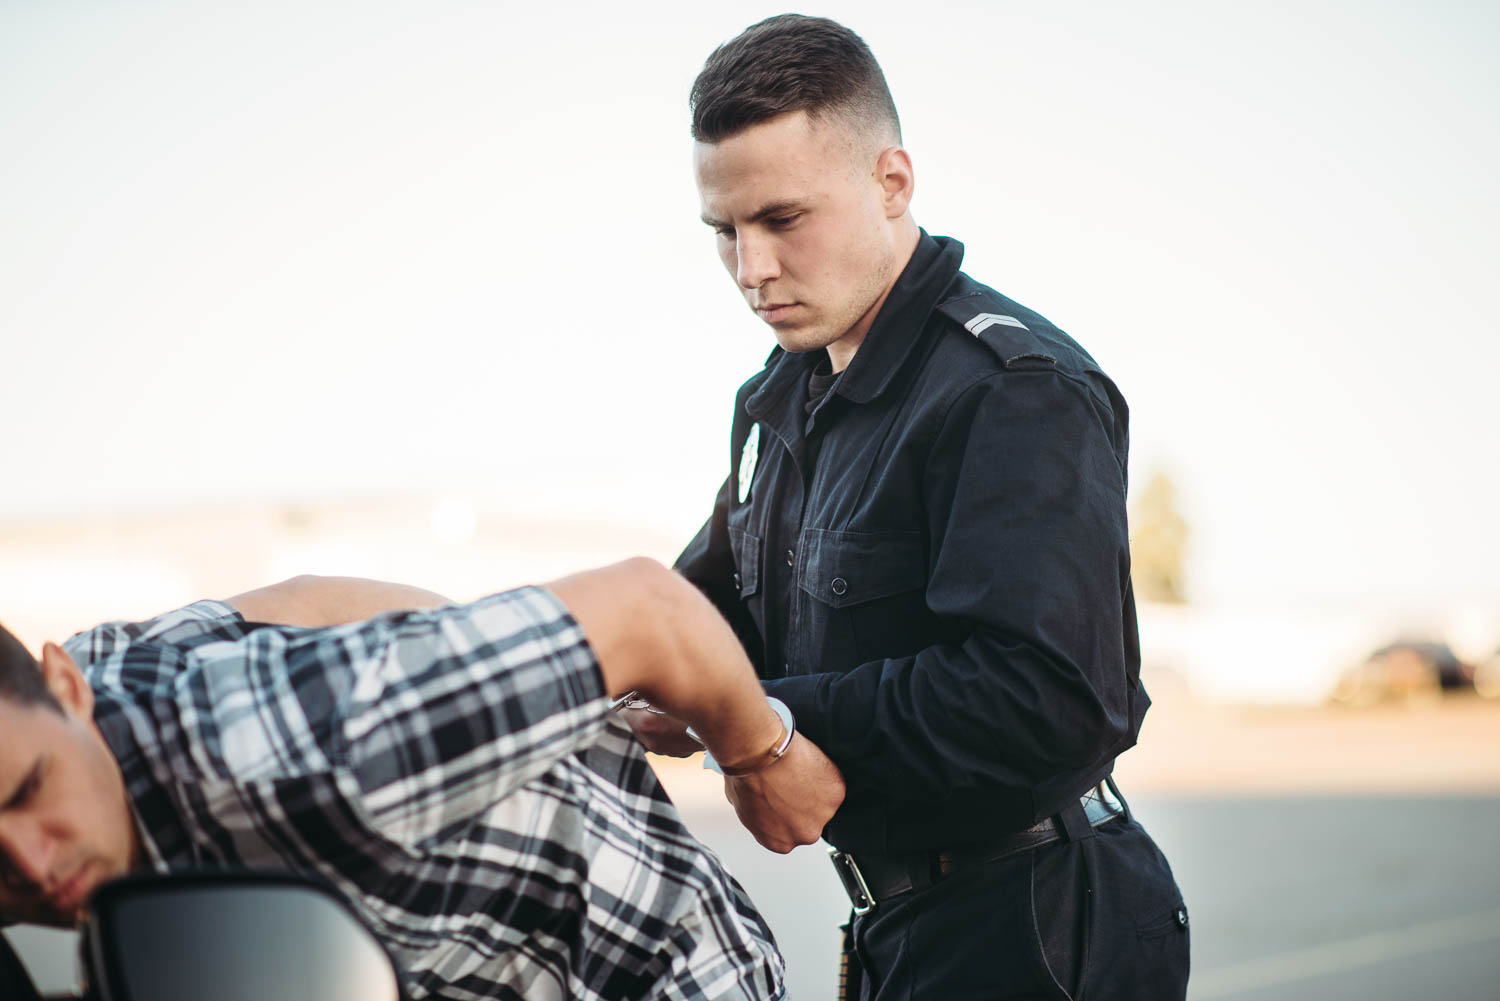 Contributing to the Dependency of a Minor Reduced to Disorderly Conduct by South Florida Defense Attorneys